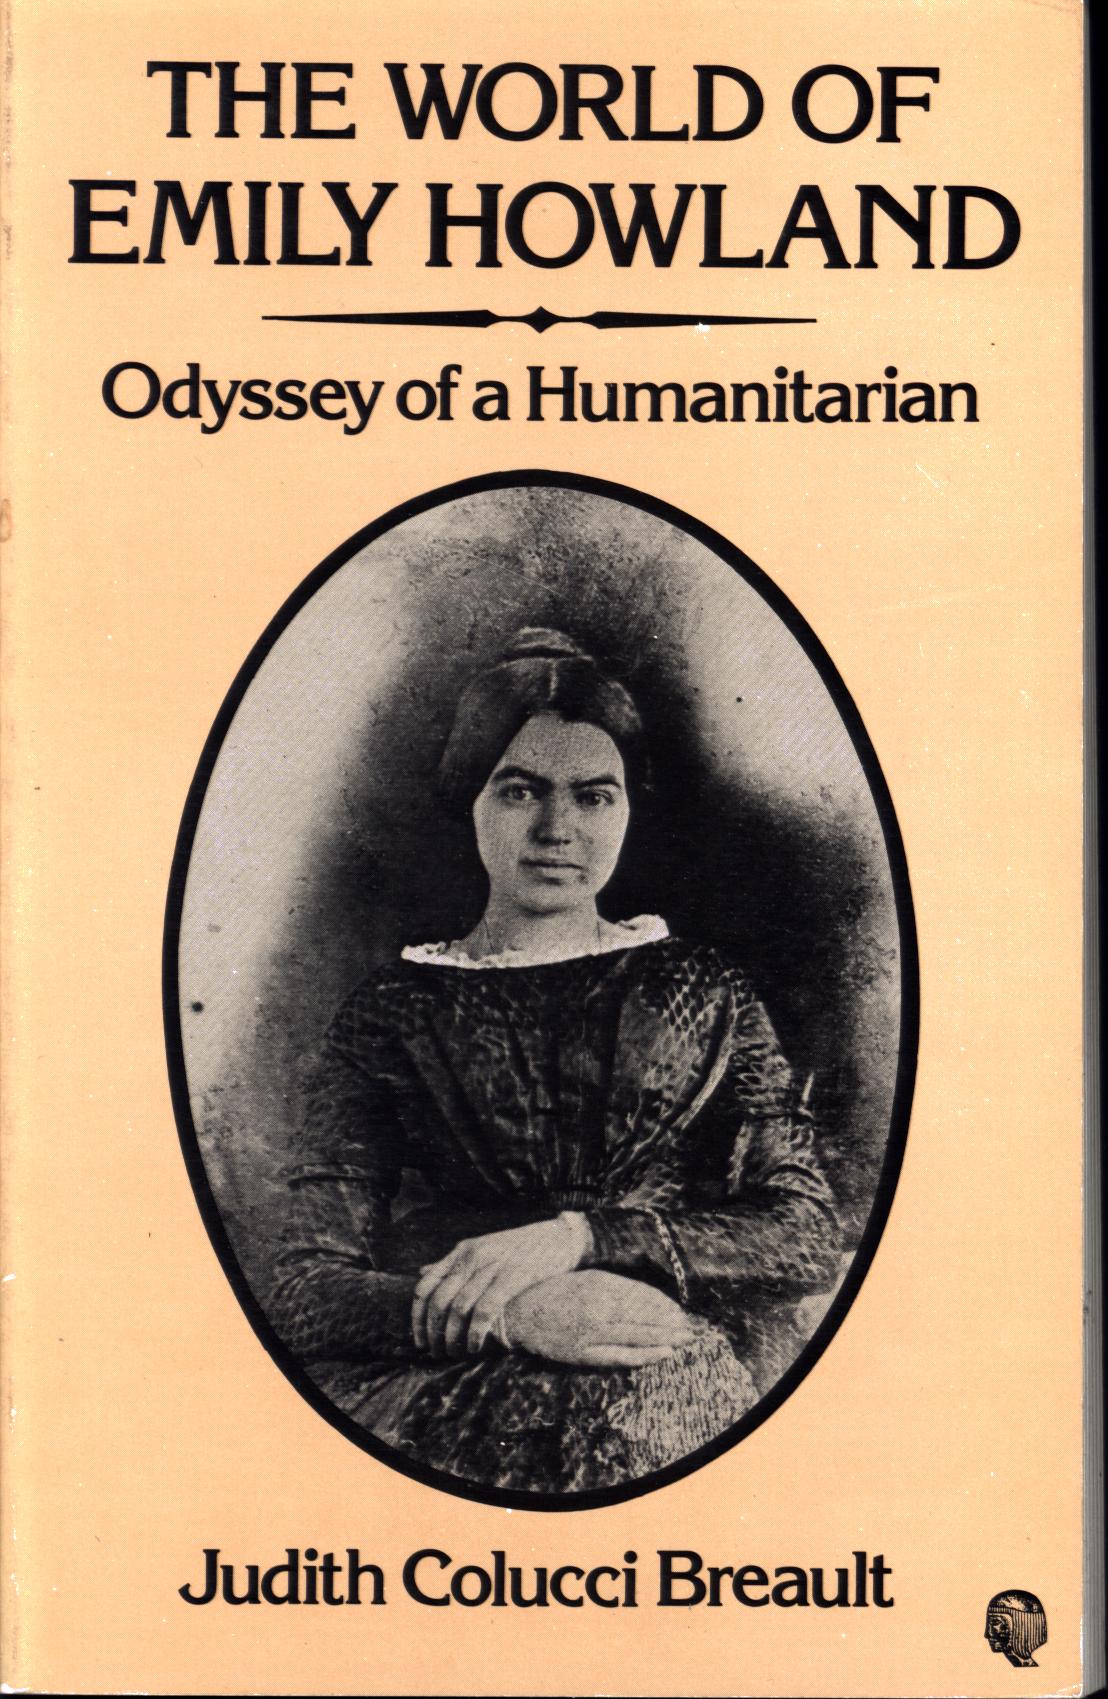 THE WORLD OF EMILY HOWLAND: odyssey of a humanitarian. 